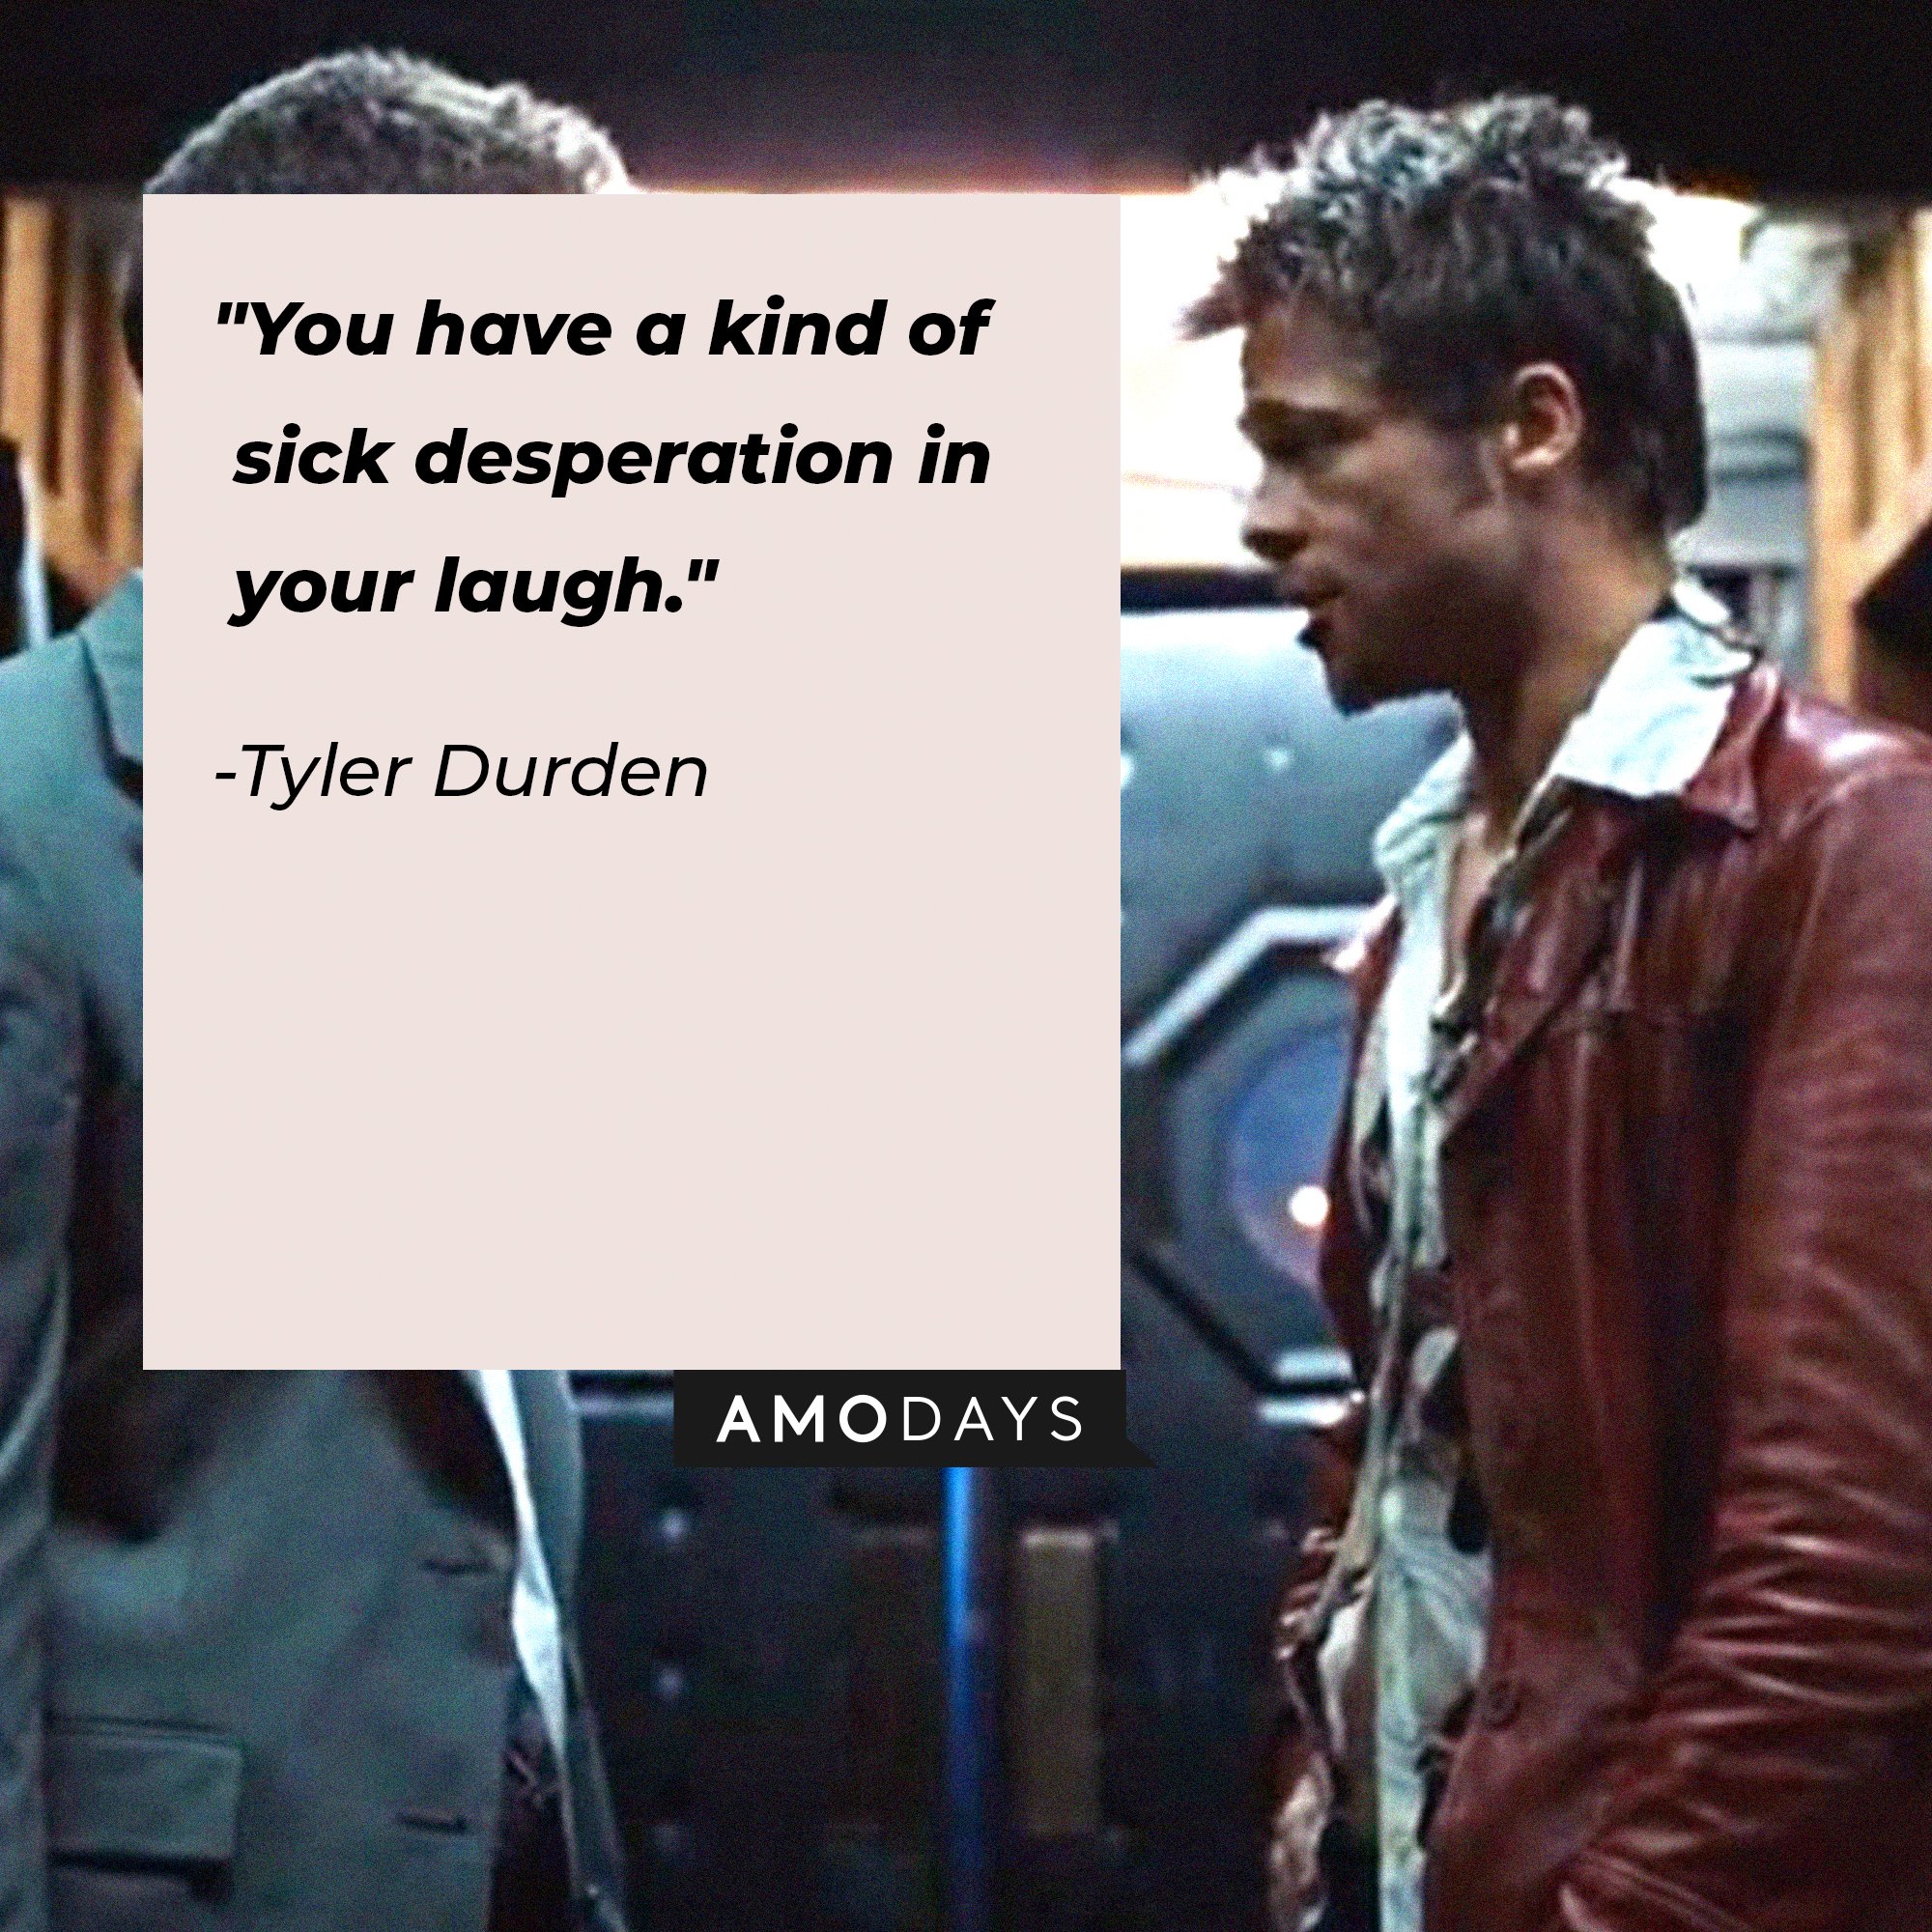  Tyler Durden's quote: "You have a kind of sick desperation in your laugh." | Image: AmoDays